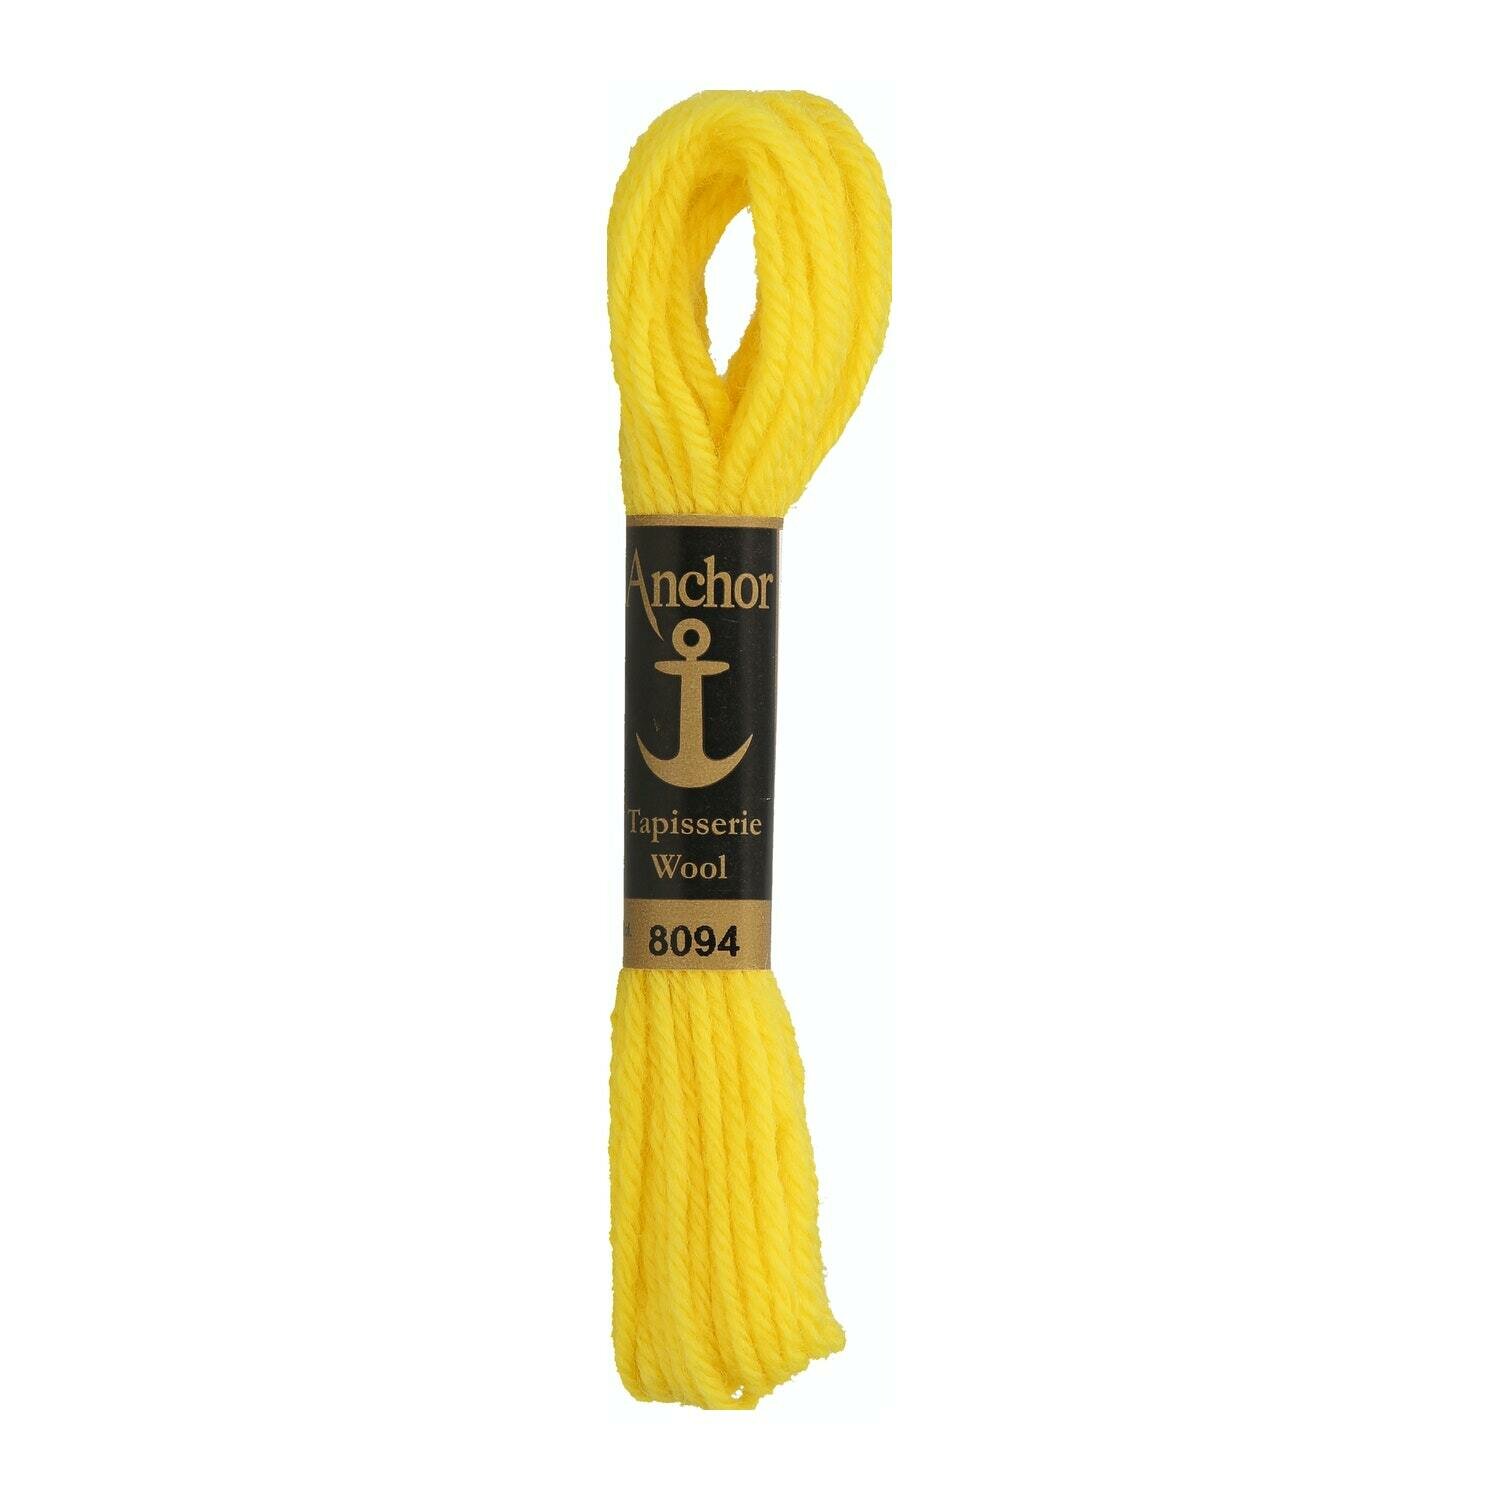 Anchor Tapisserie Wool # 08094